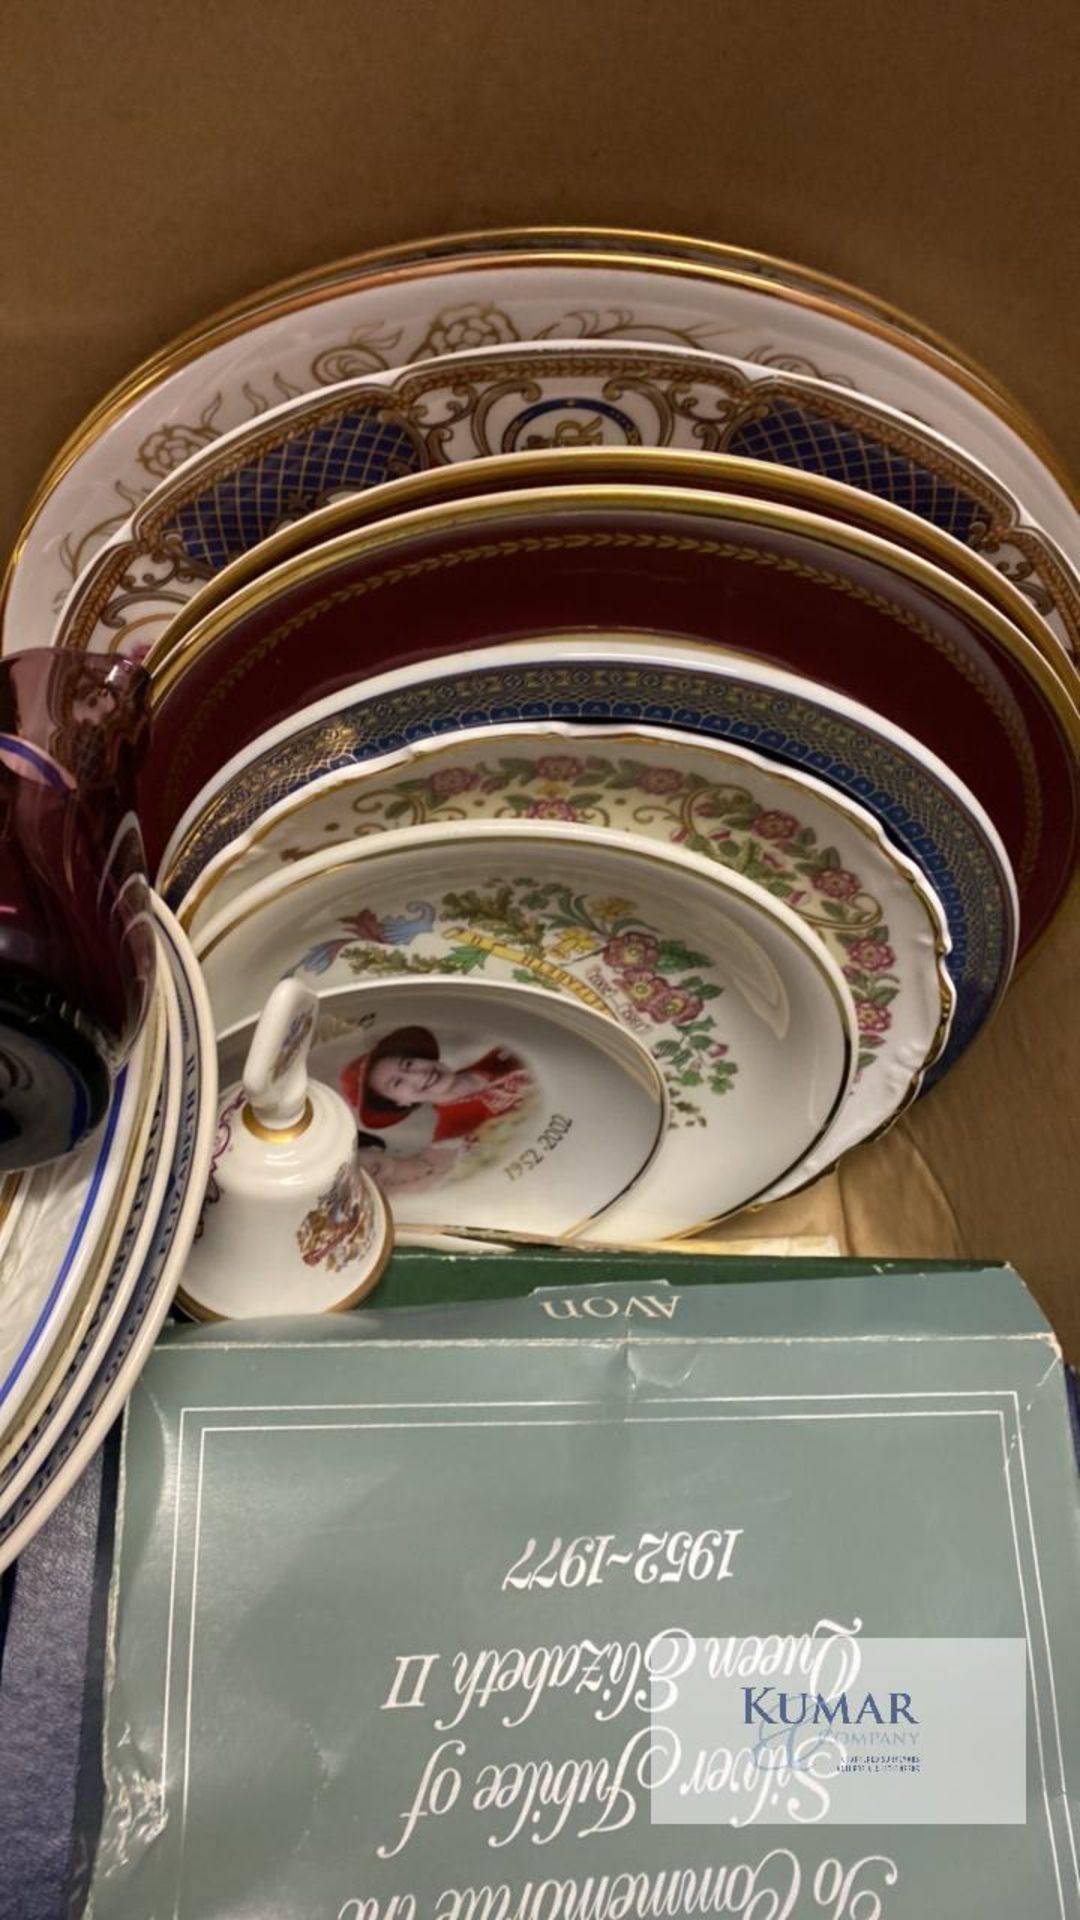 Collection of Royal Memorabilia to include Commemorative Plates - Image 21 of 24